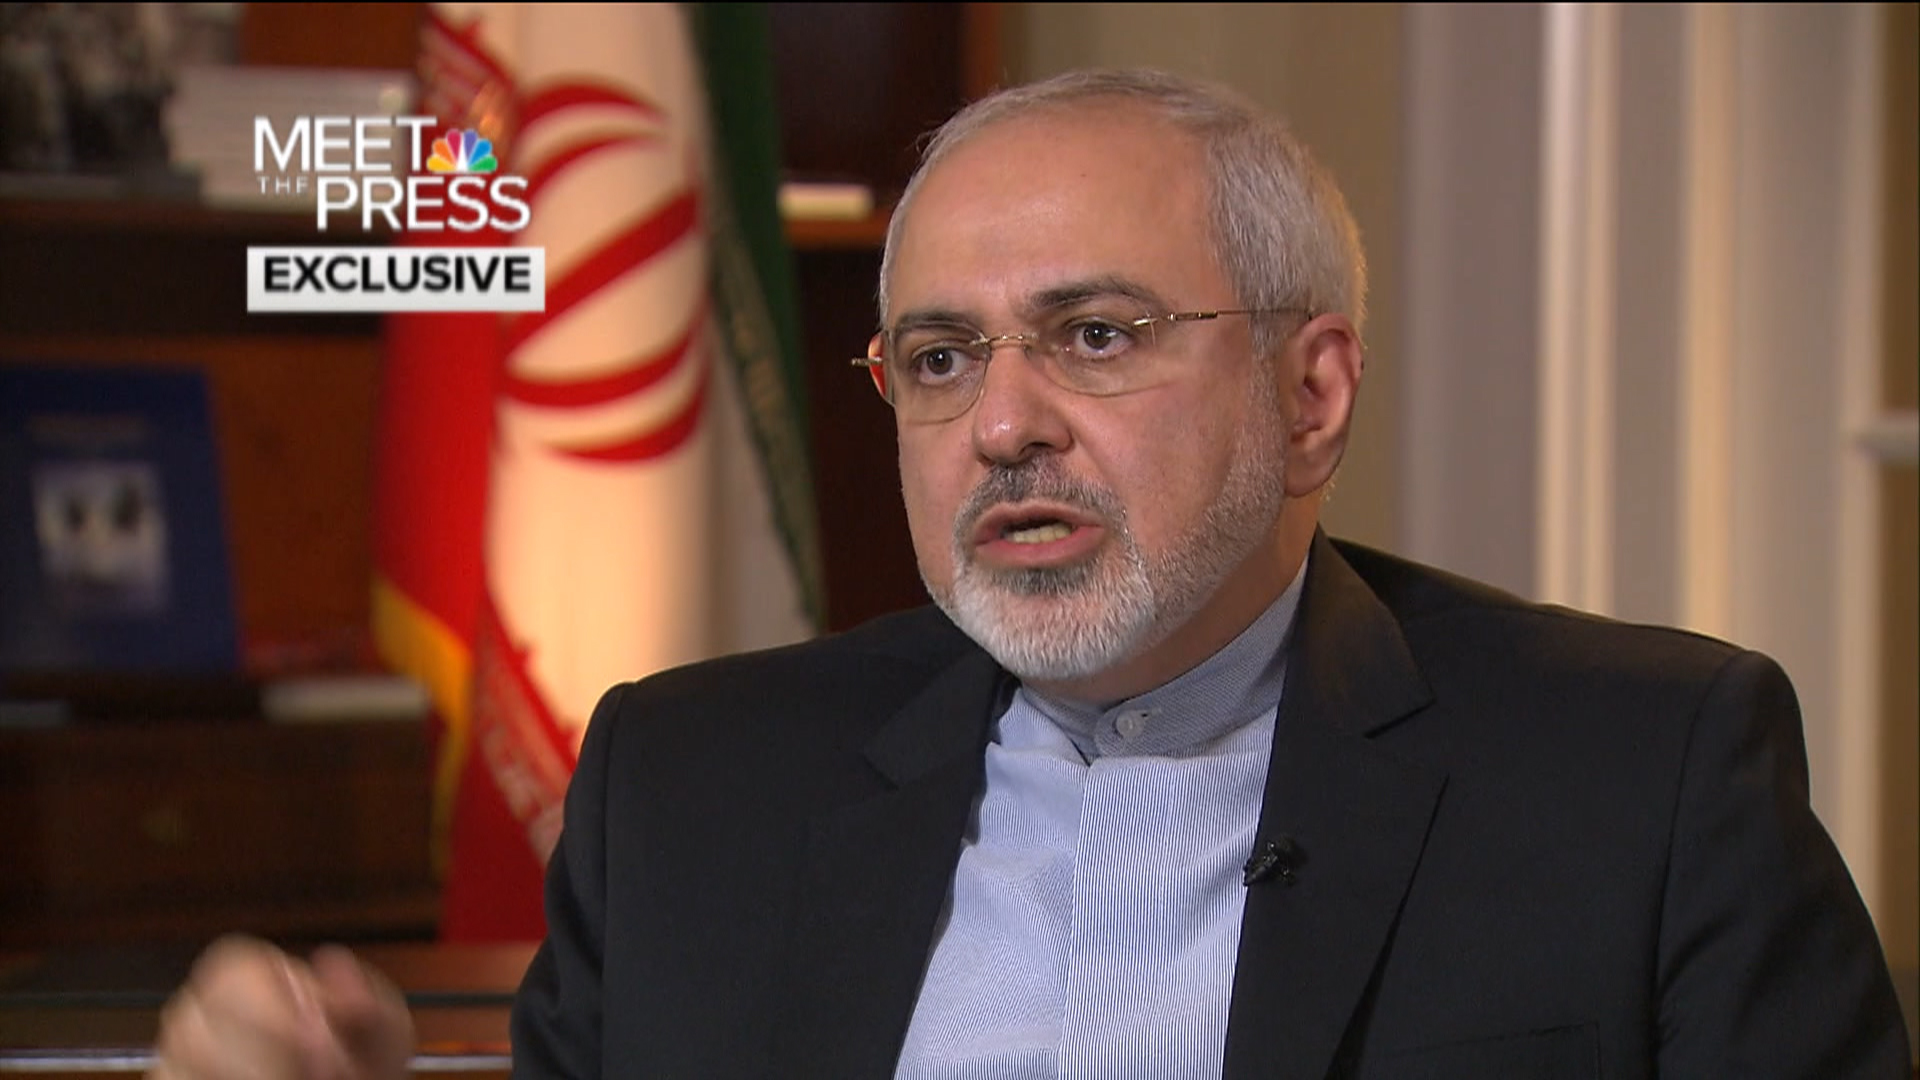 Iran’s FM: threats do not work against Iran, we respond to respect